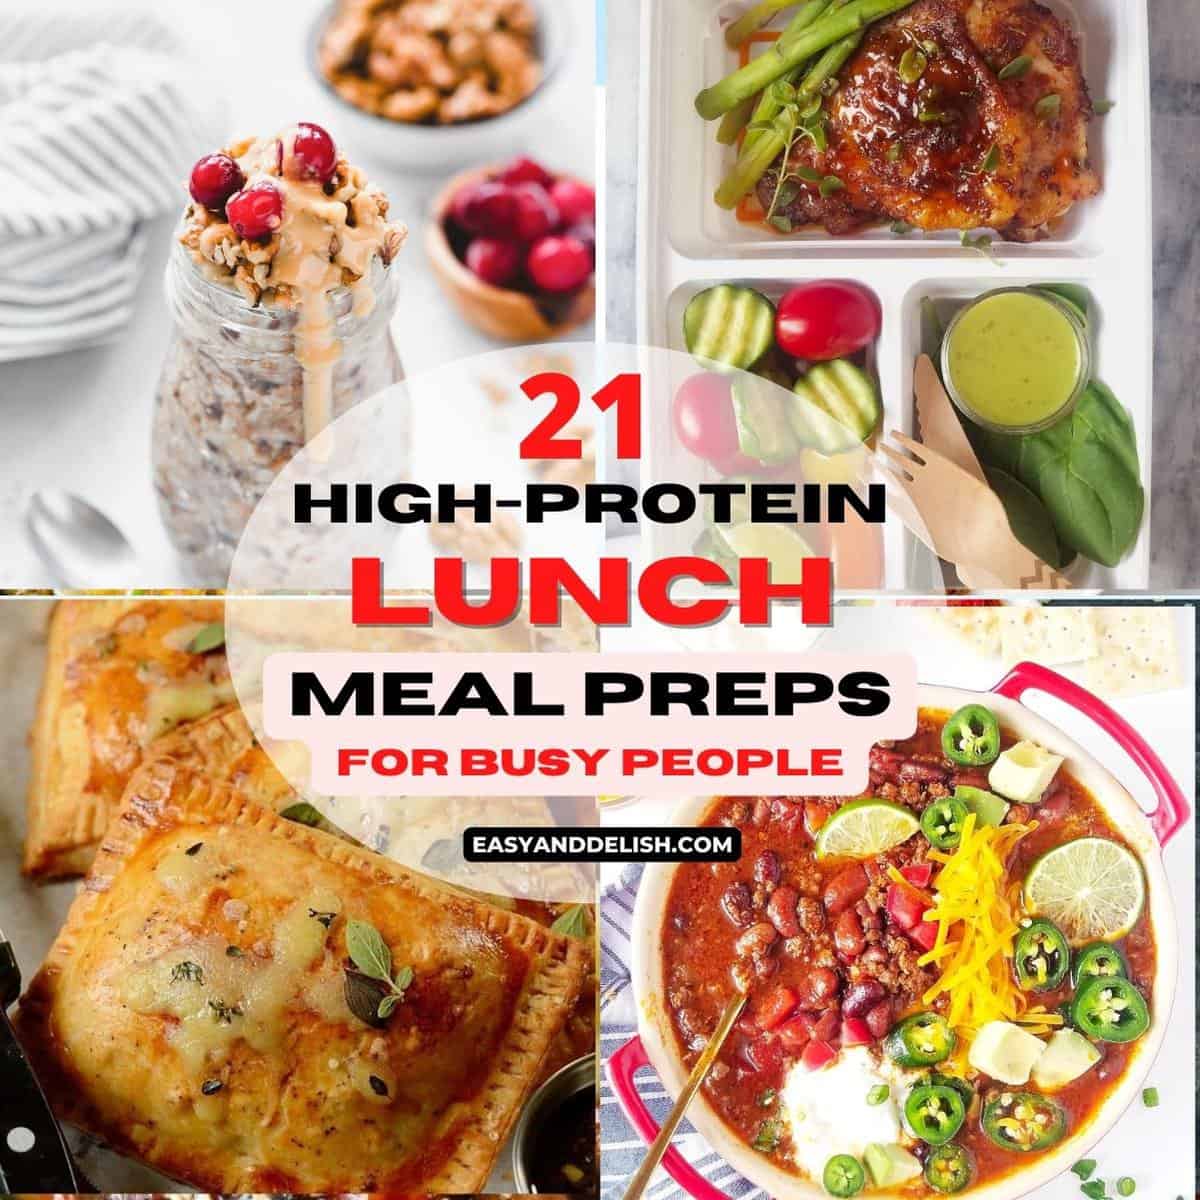 Protein Snack Pack - Easy Lunch Meal Prep - The Forked Spoon